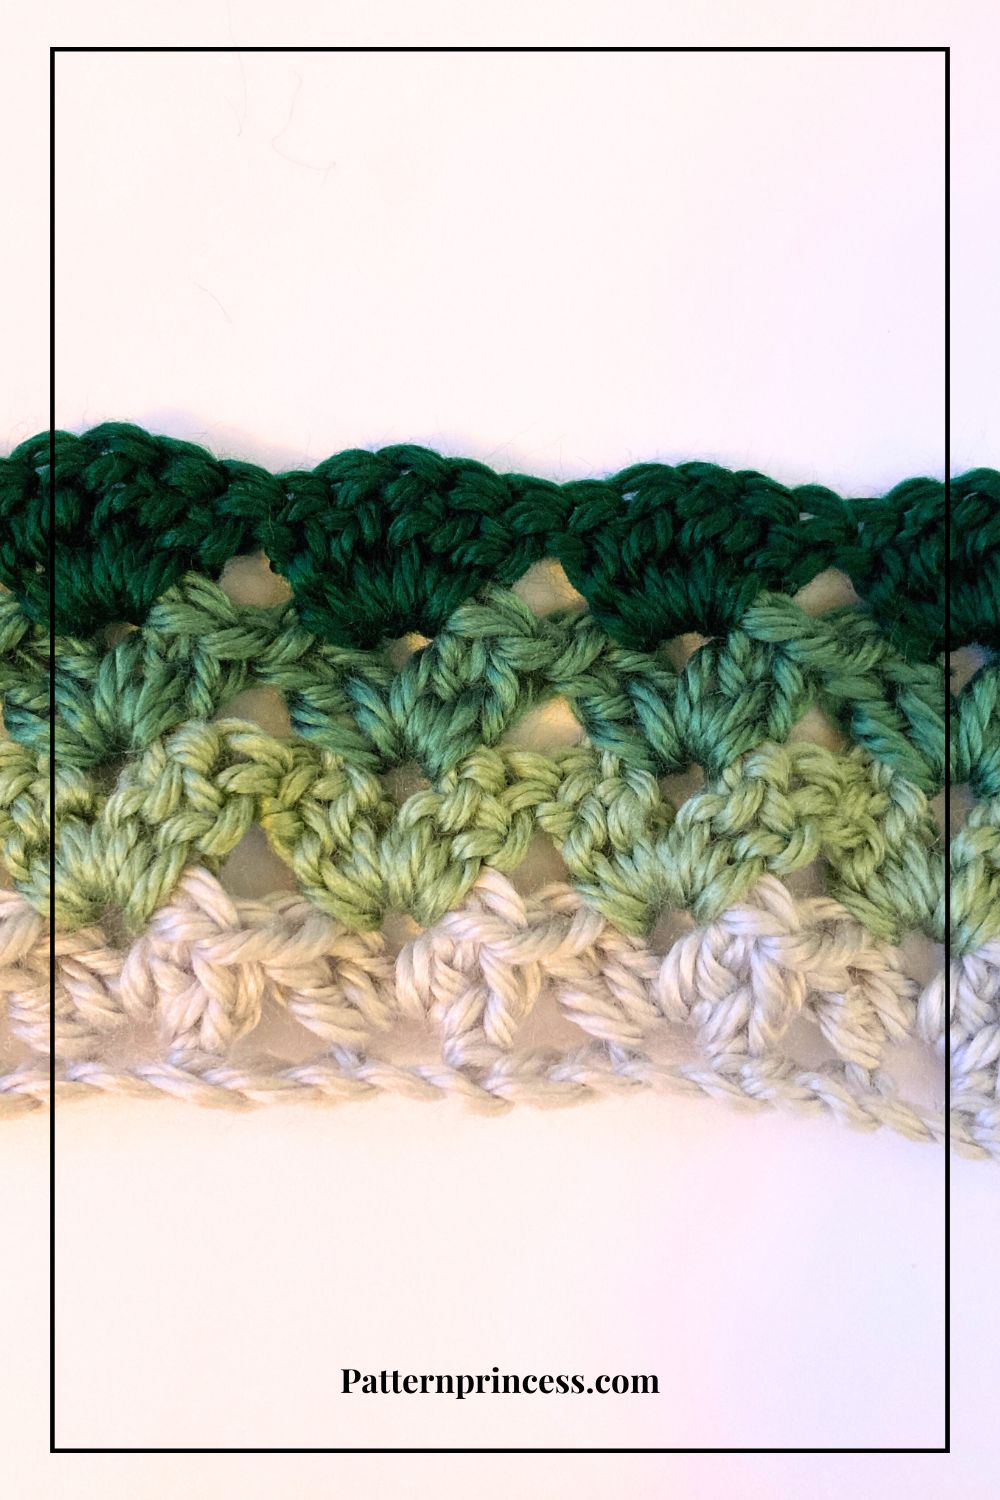 Two Double Crochet V Stitch in Different Colors